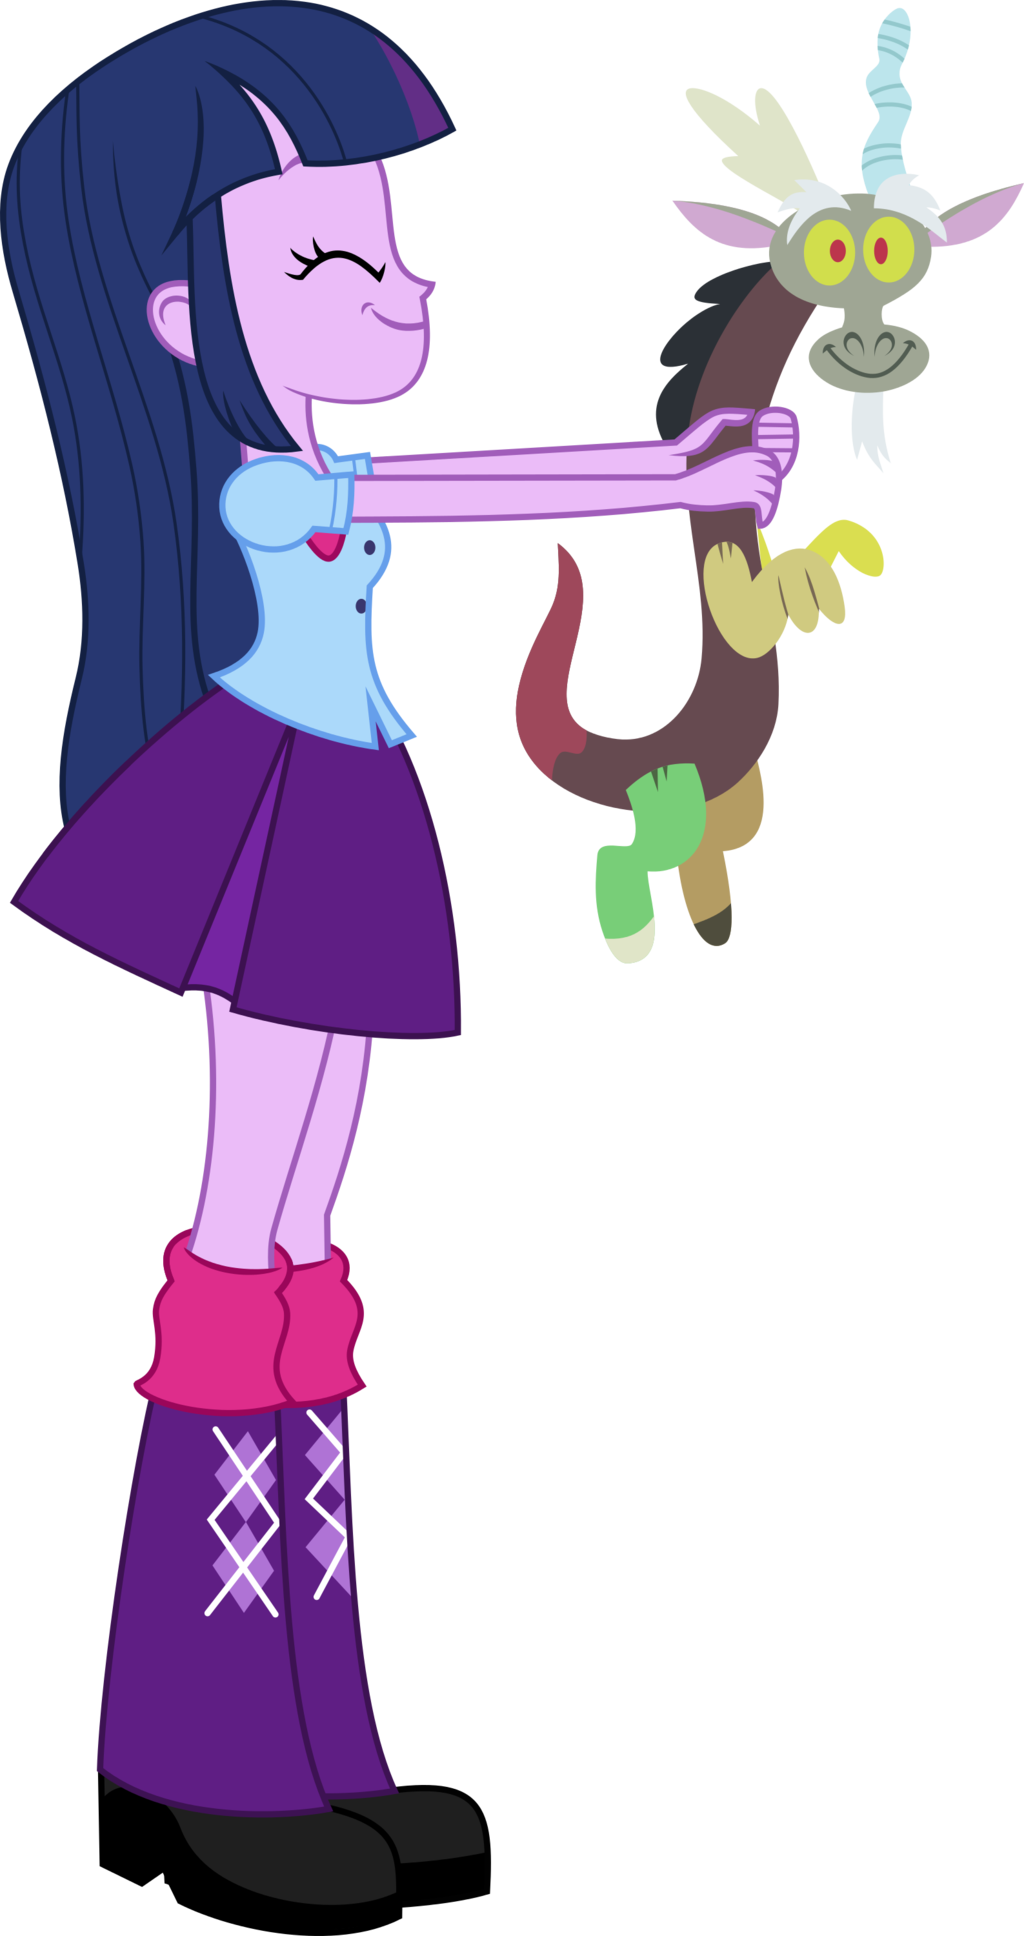 Twilight and plush Discord by KateQuantum